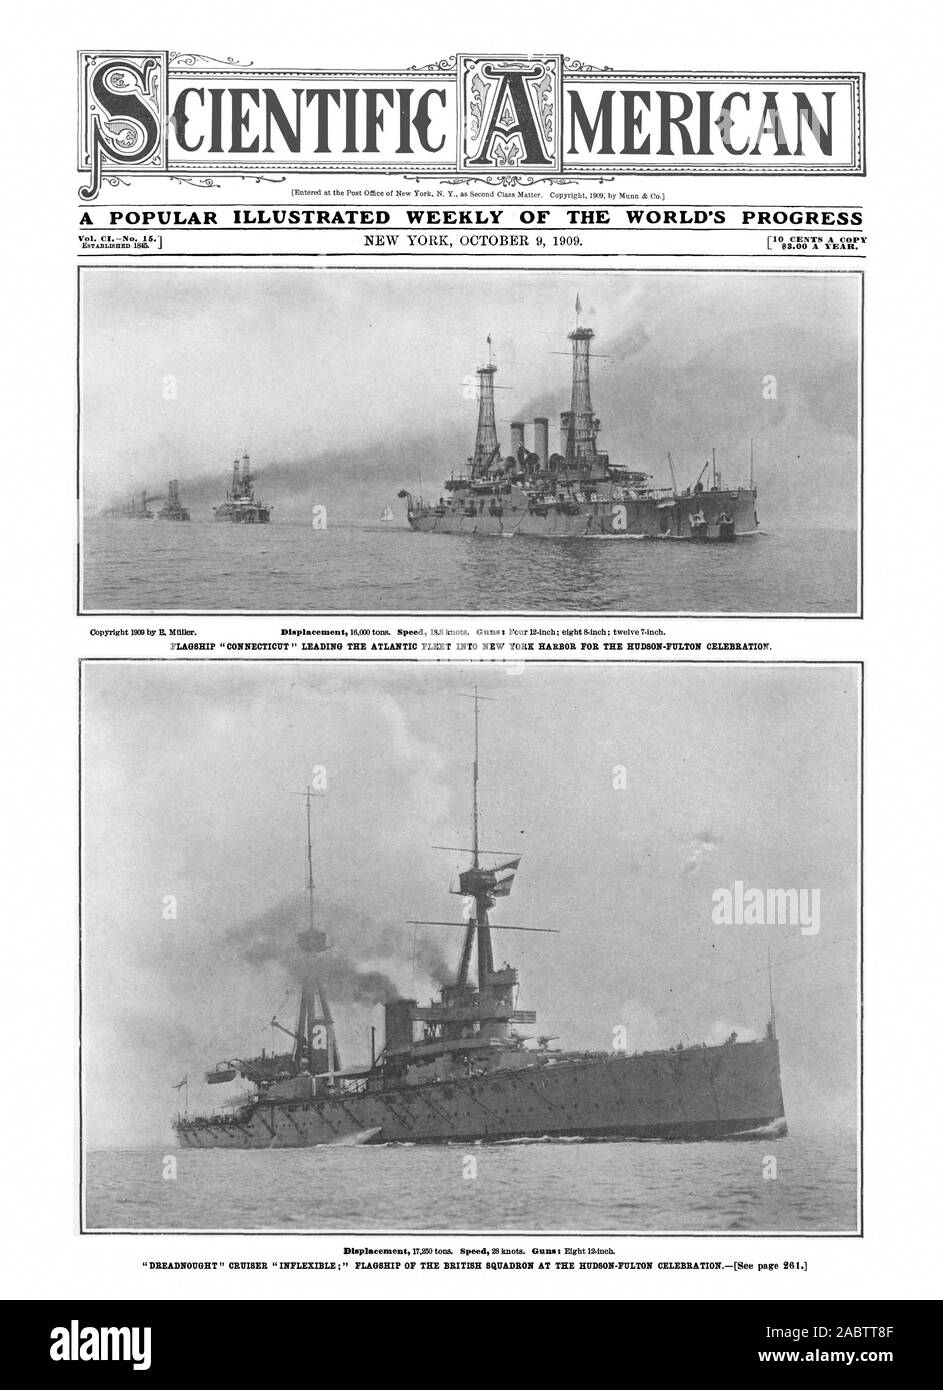 A POPULAR ILLUSTRATED WEEKLY OF THE WORLD'S PROGRESS FLAGSHIP 'CONNECTICUT' LEADING THE ATLANTIC FLEET INTO NEW YORK HARBOR FOR THE HUDSON-FULTON CELEBRATION. MERICA, scientific american, -1909-10-09 Stock Photo